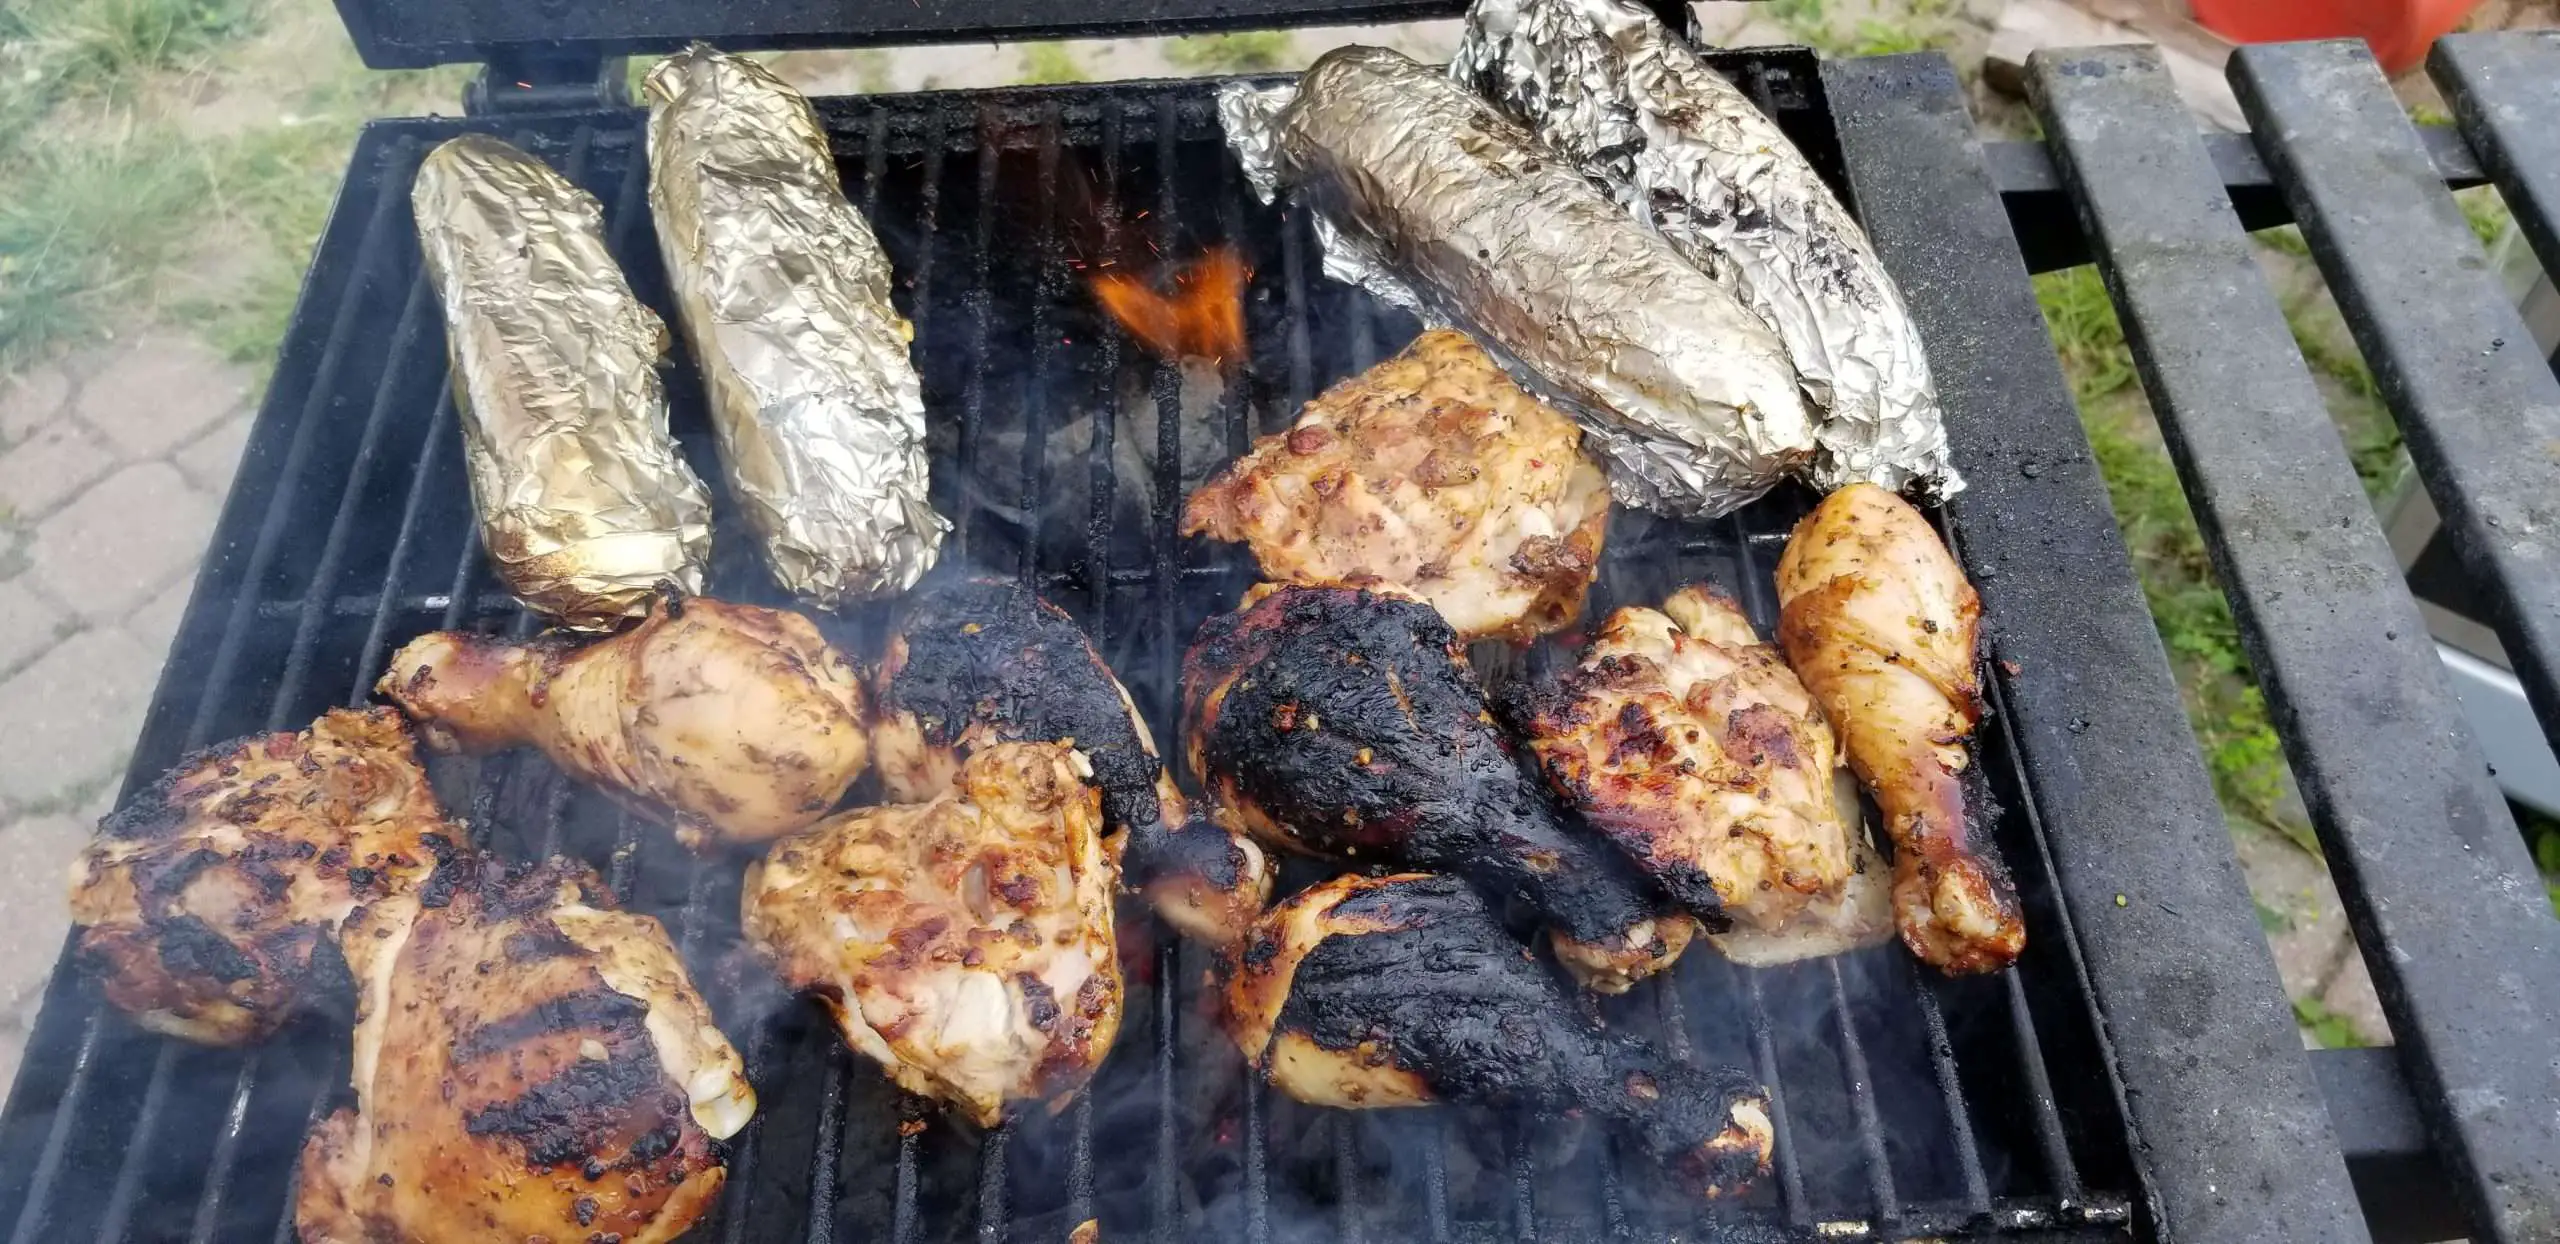 How to stop burning chicken on a charcoal grill? : grilling